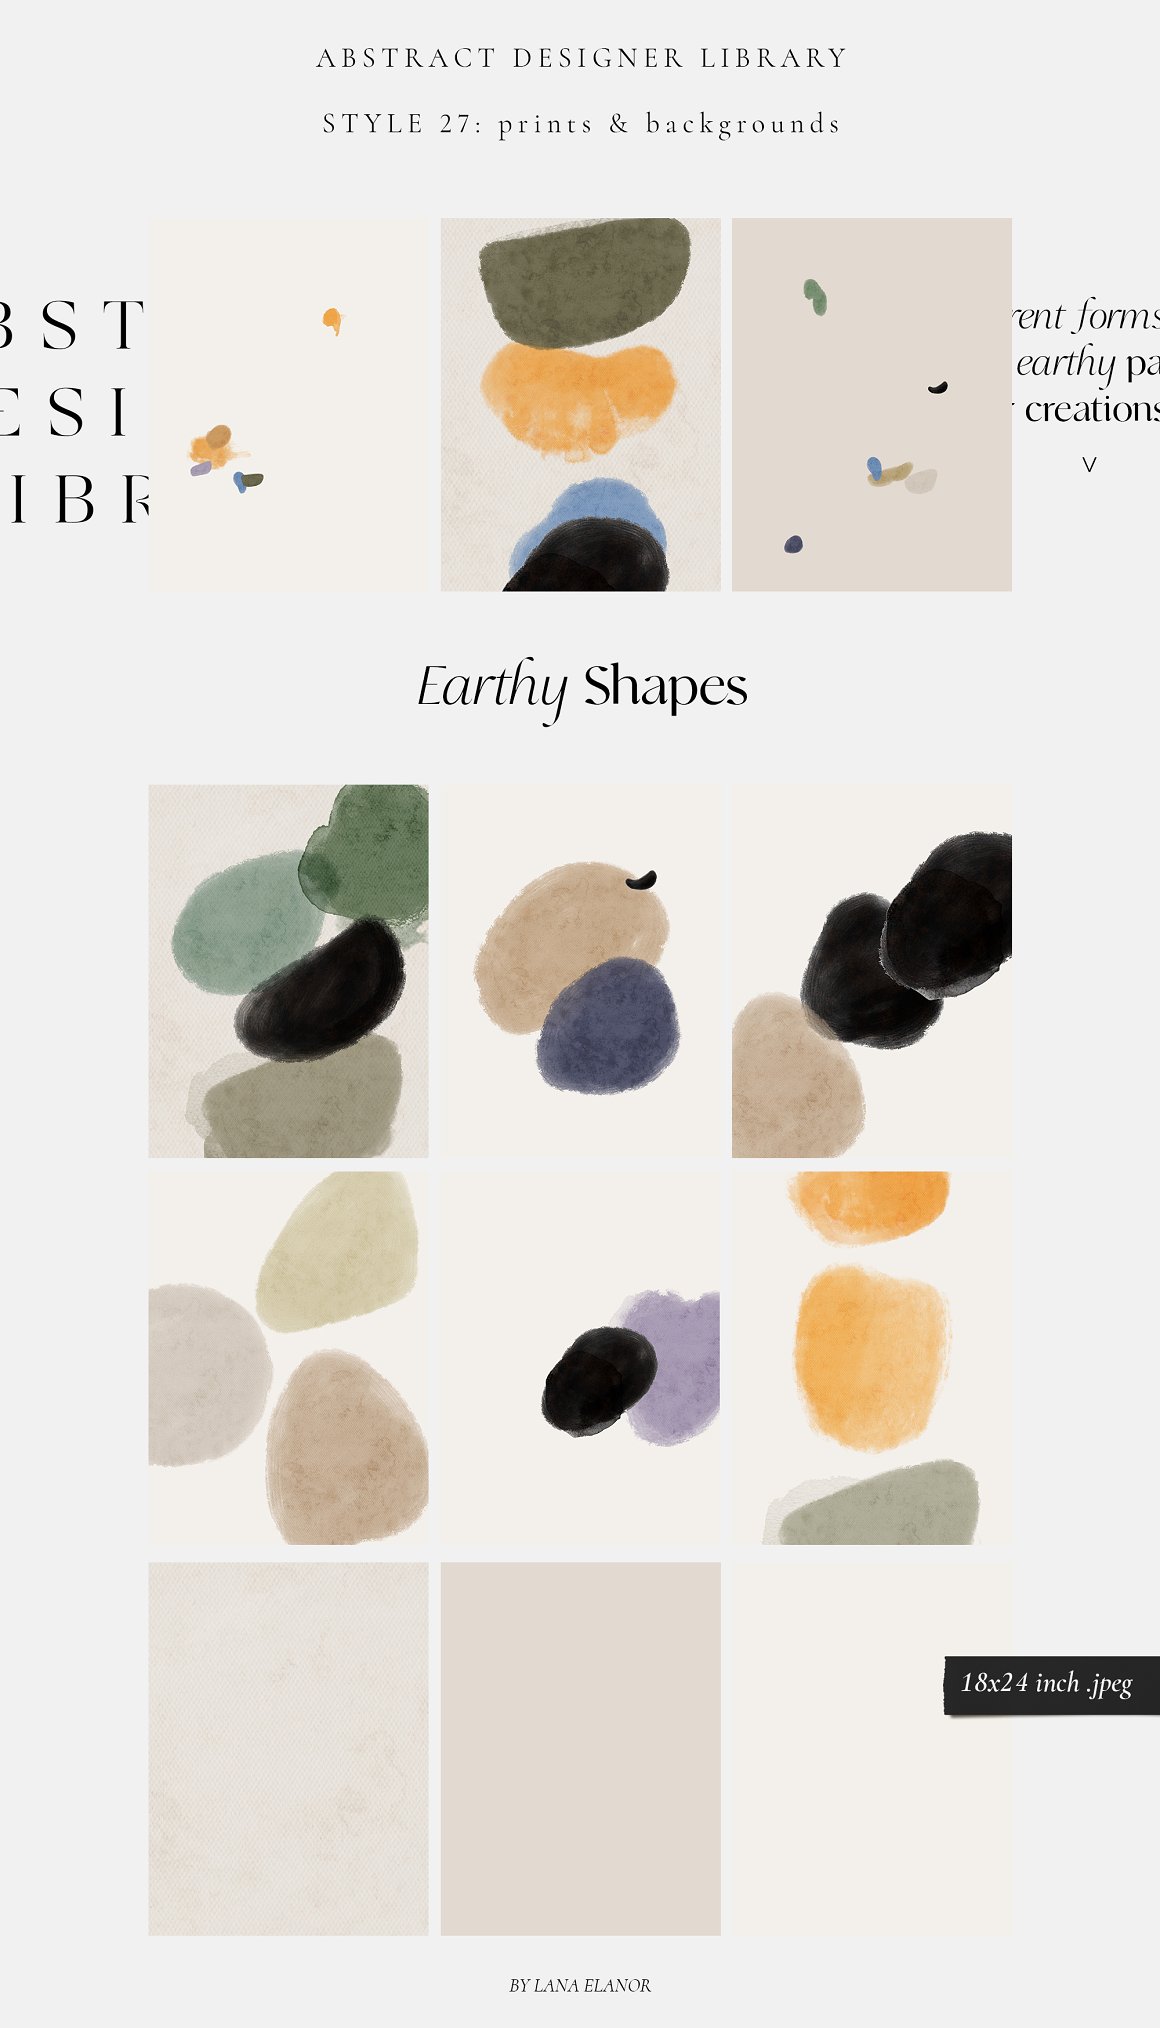 Earthy shapes library on a gray background.